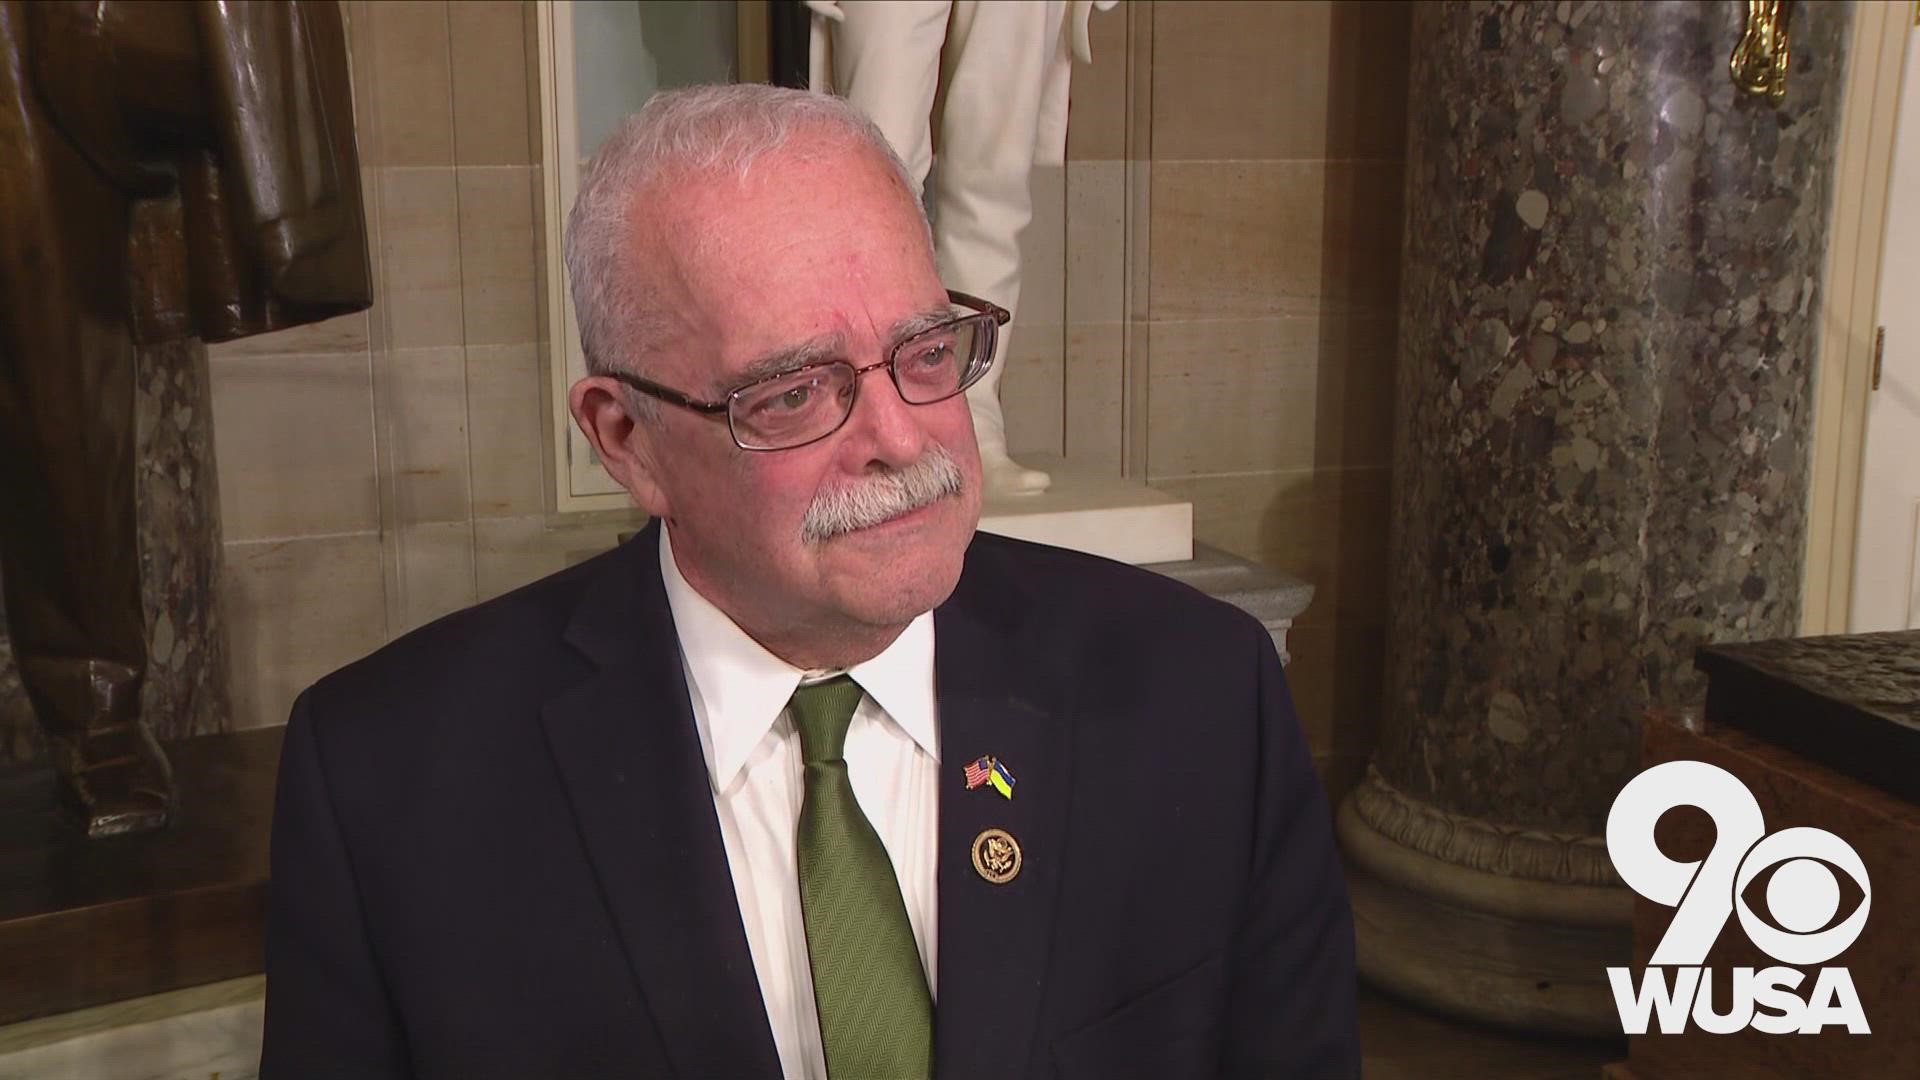 Police have identified the man accused of hitting two members of Rep. Gerry Connolly's staff Monday with a baseball bat at the congressman's office.